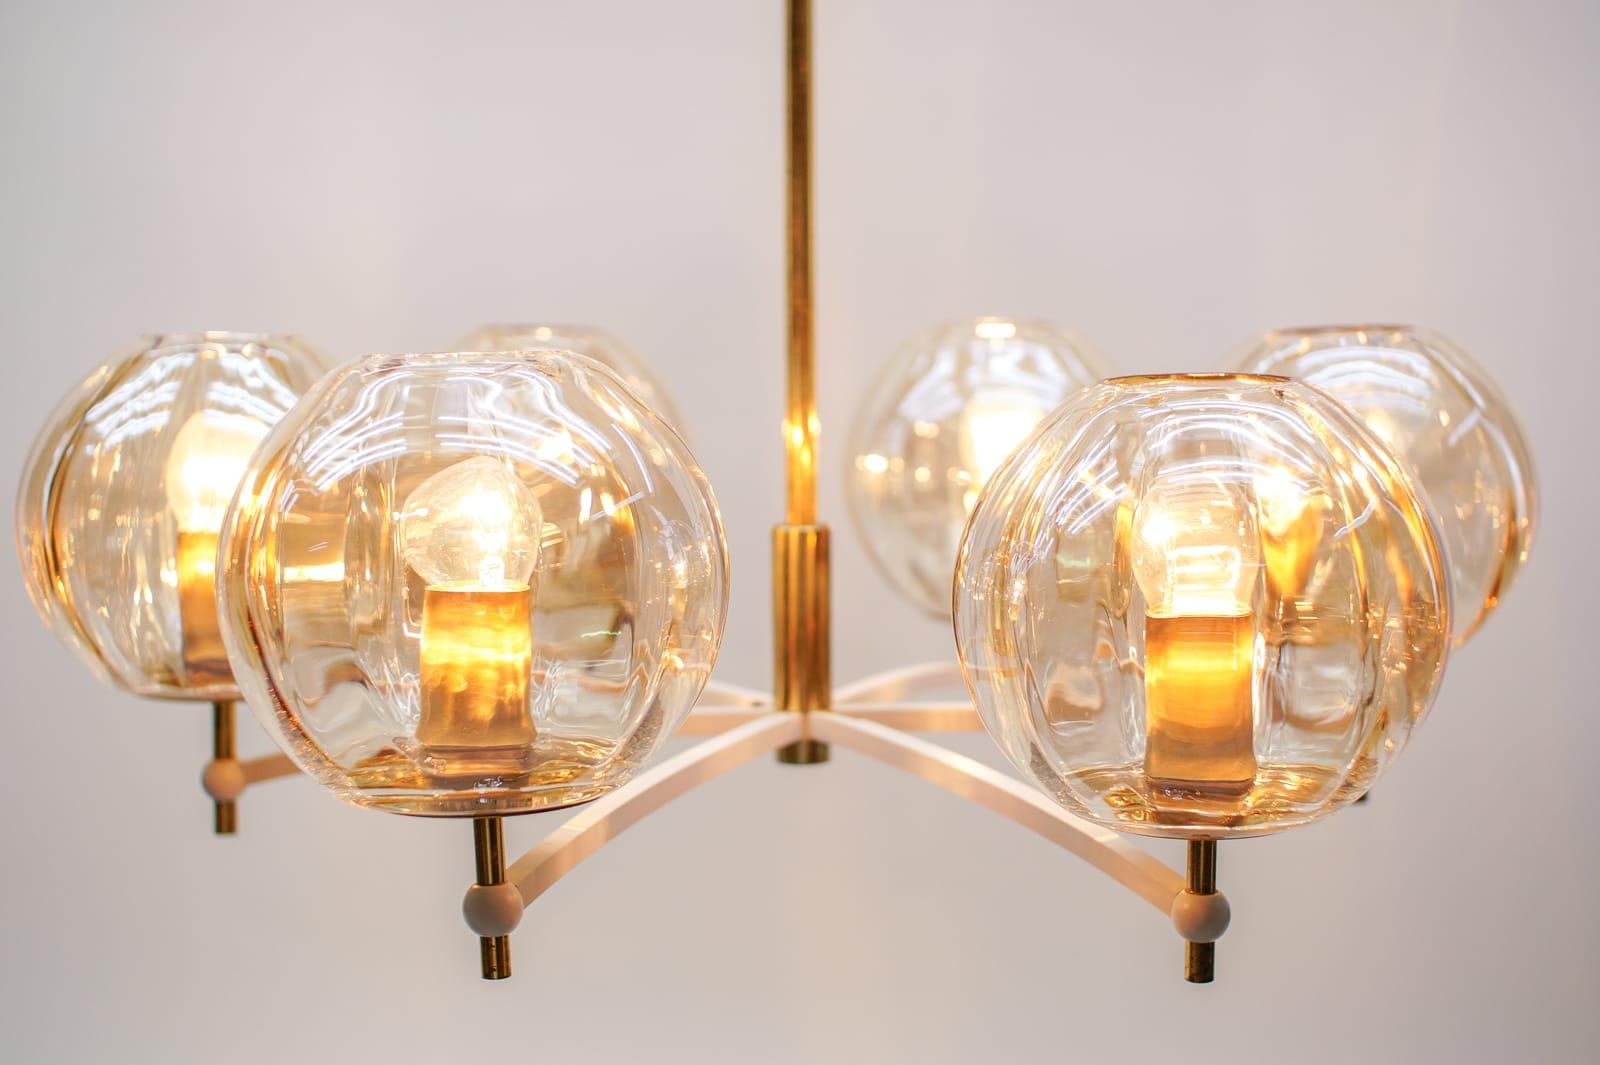 Elegant Mid-Century Modern Orbit Ceiling Lamp in Amber Glass and Brass, 1960s In Good Condition For Sale In Nürnberg, Bayern